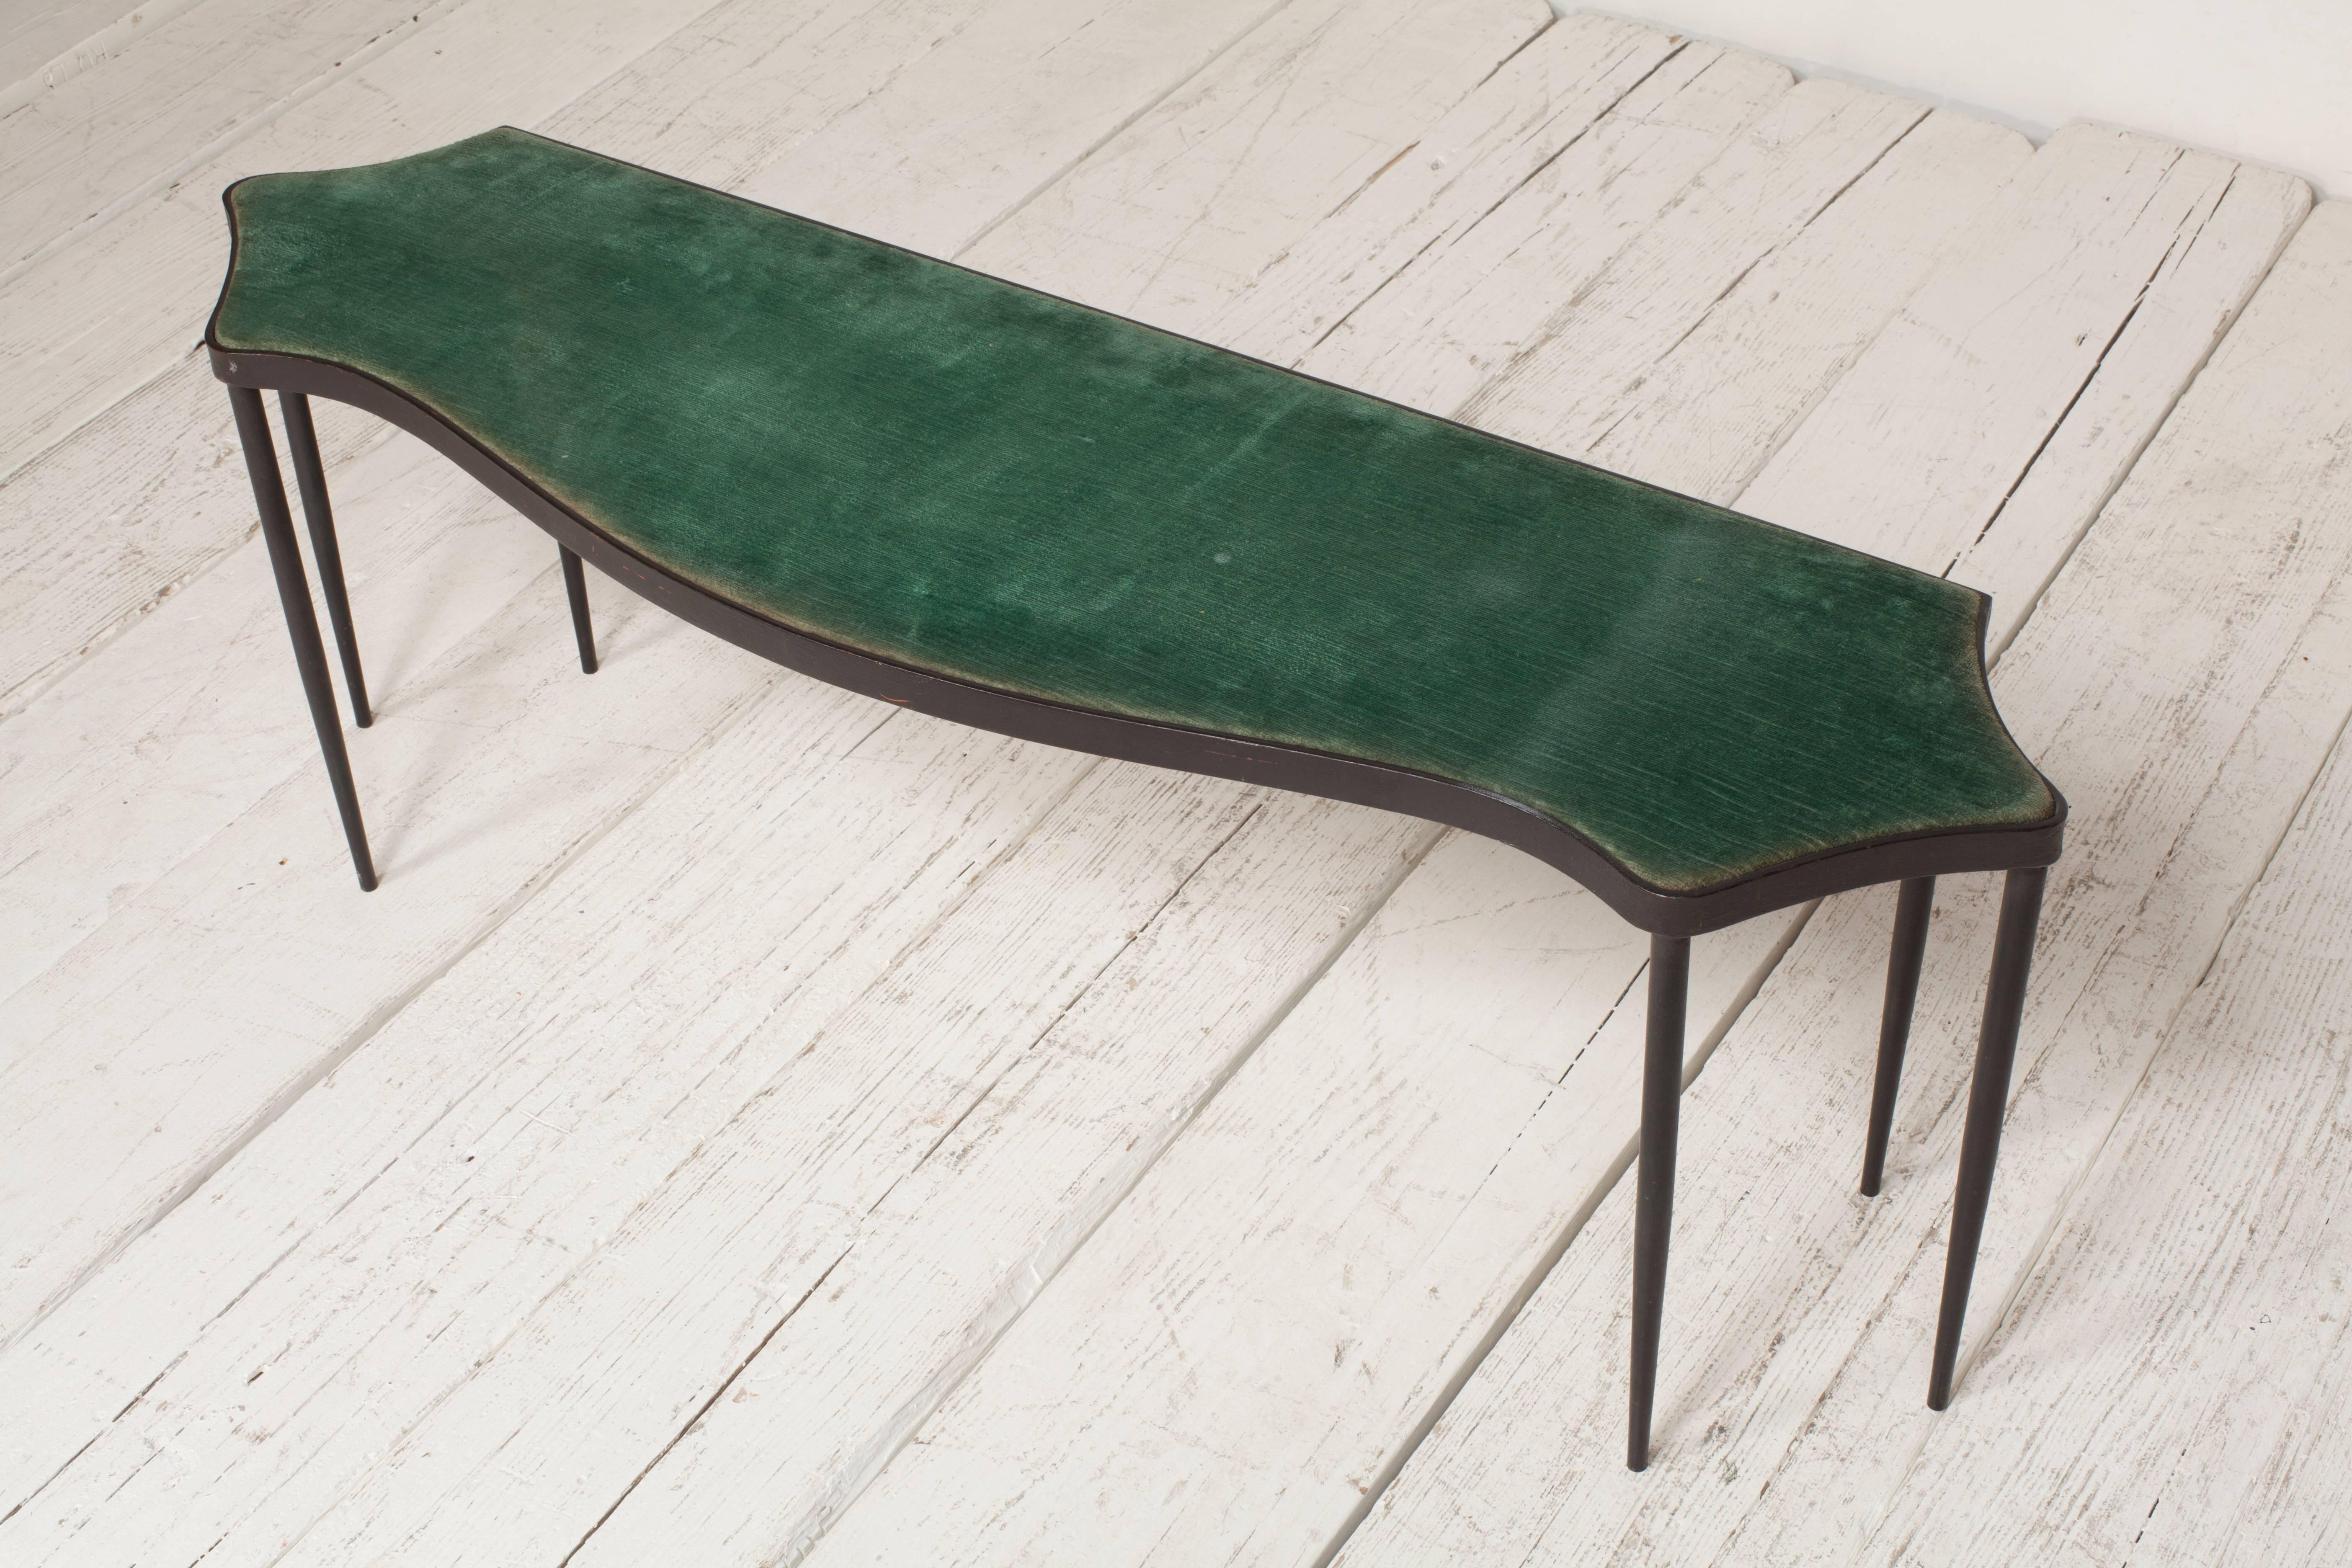 Low French iron framed bench with six tapered legs upholstered in original green velvet.